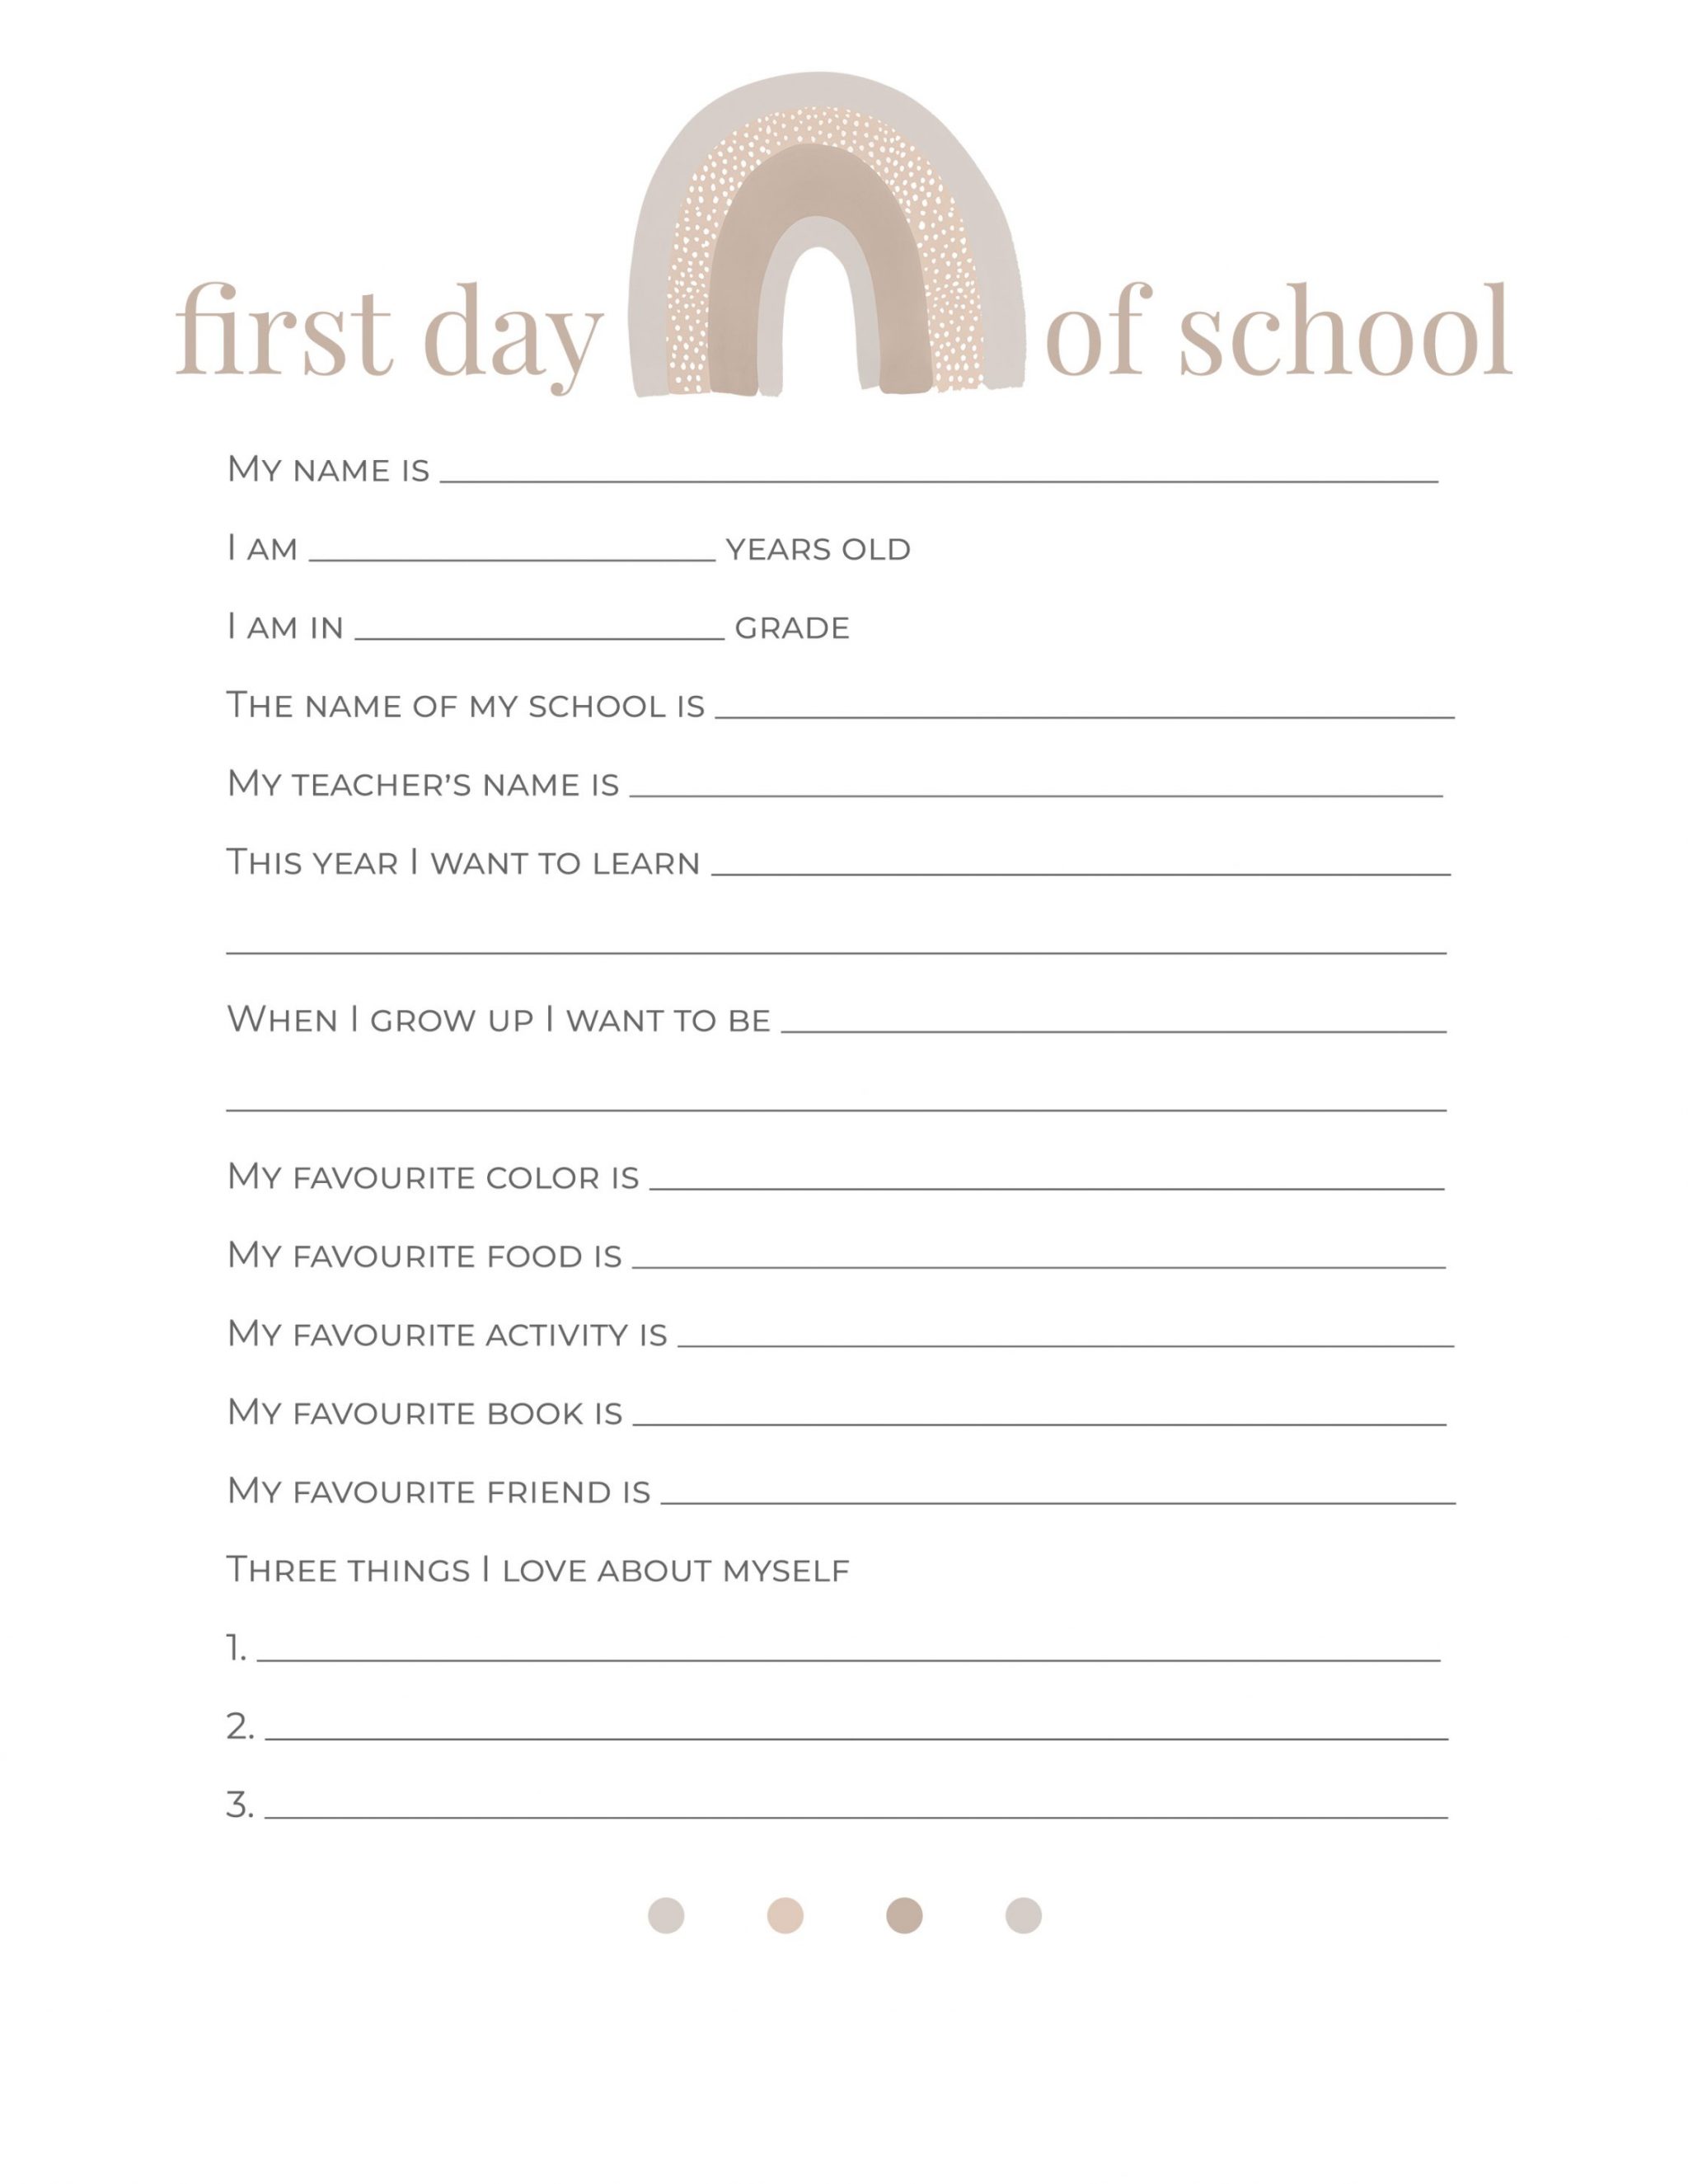 first-day-of-school-questionnaire-printable-nick-alicia